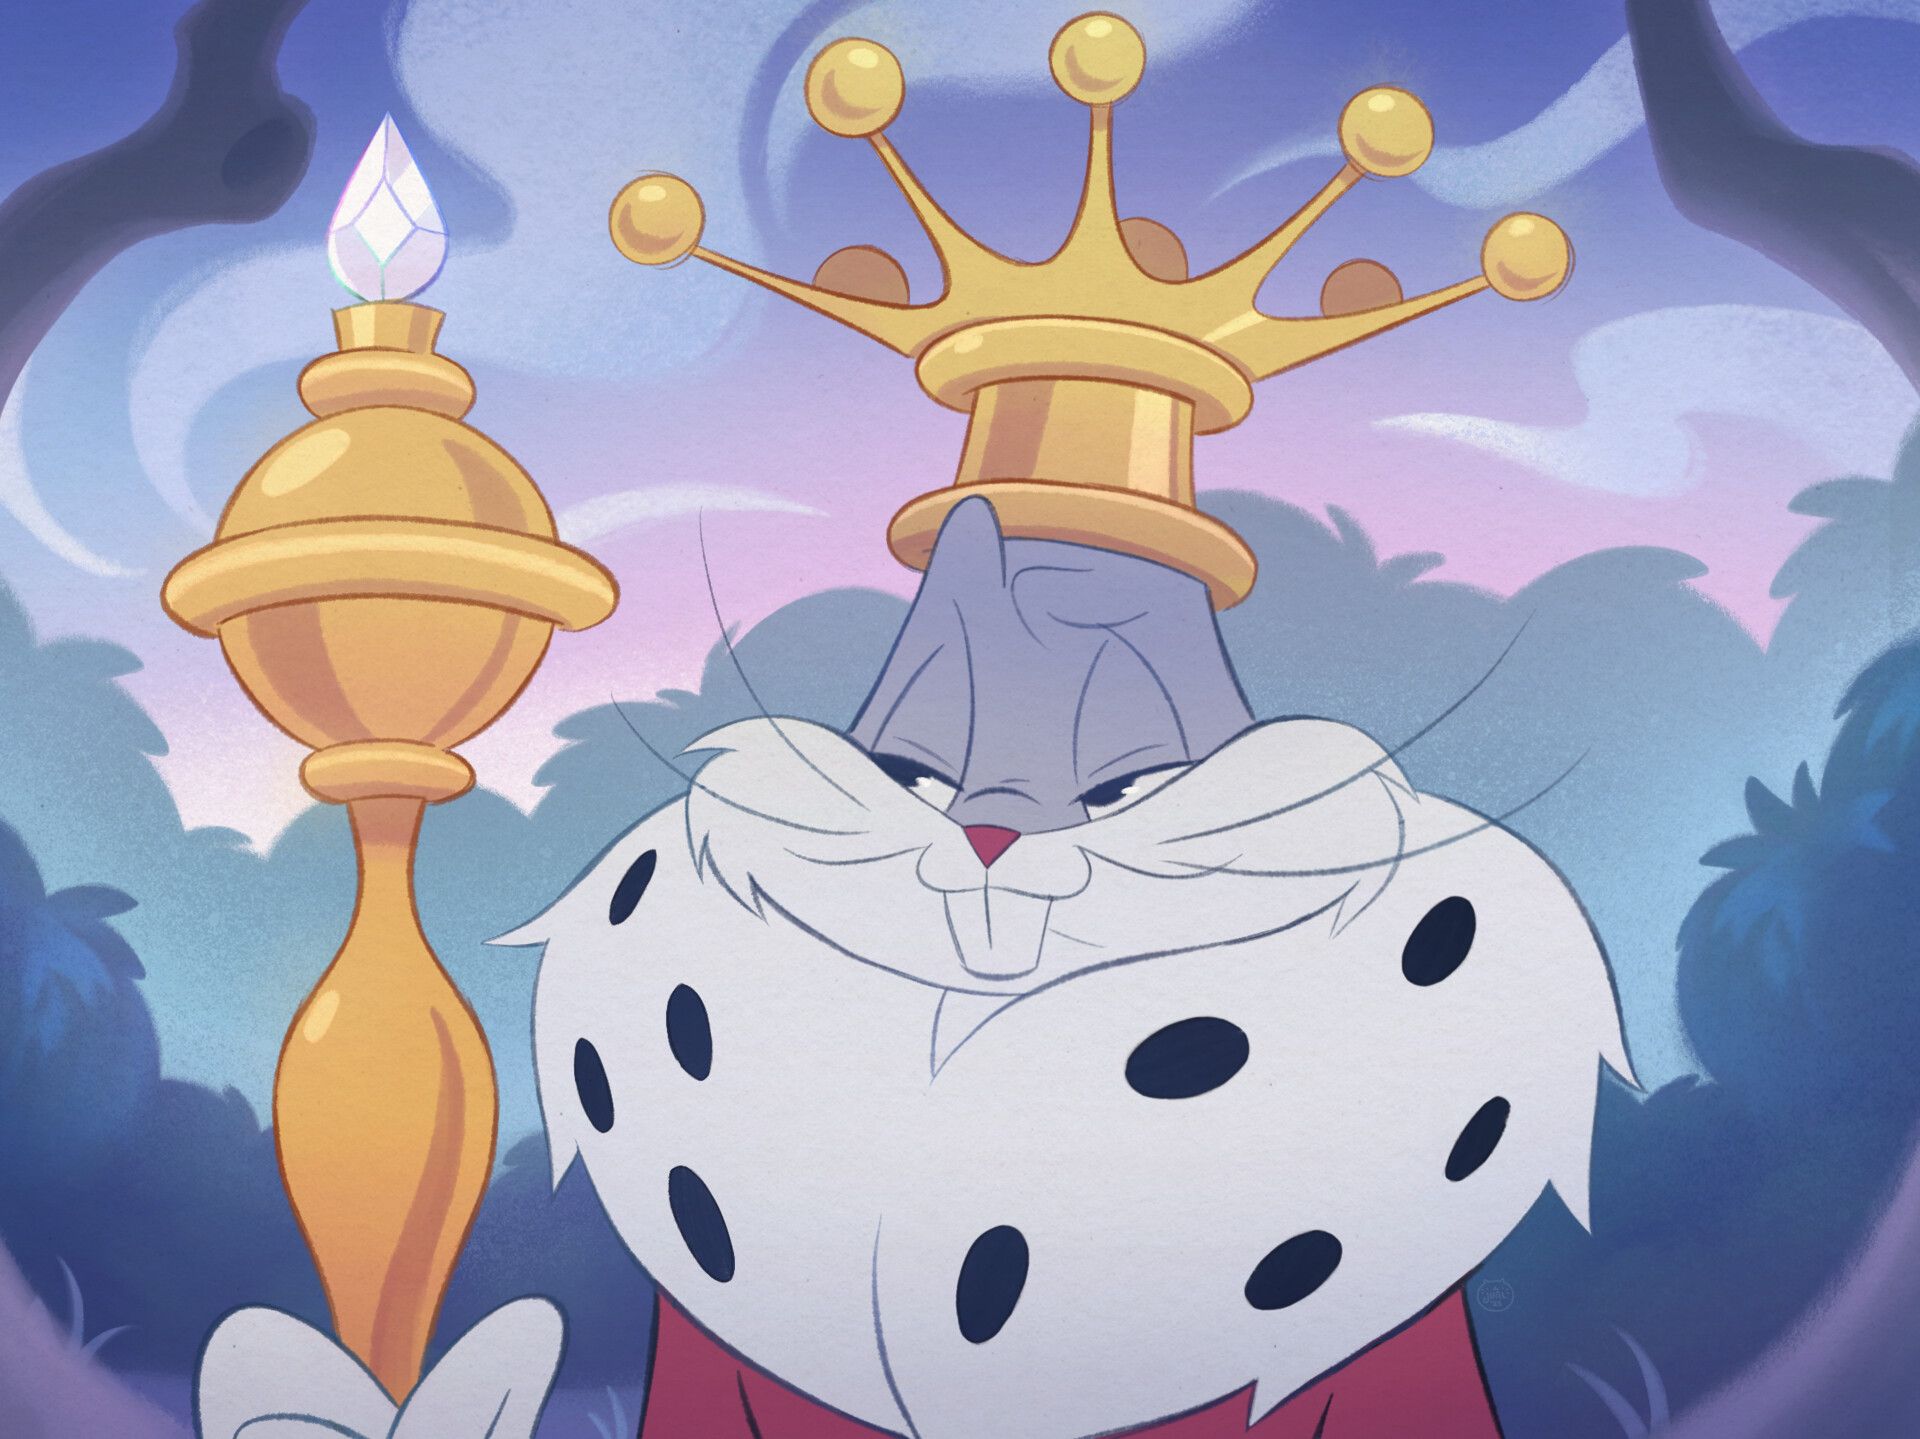 A cartoon character wearing an oversized crown - Bugs Bunny